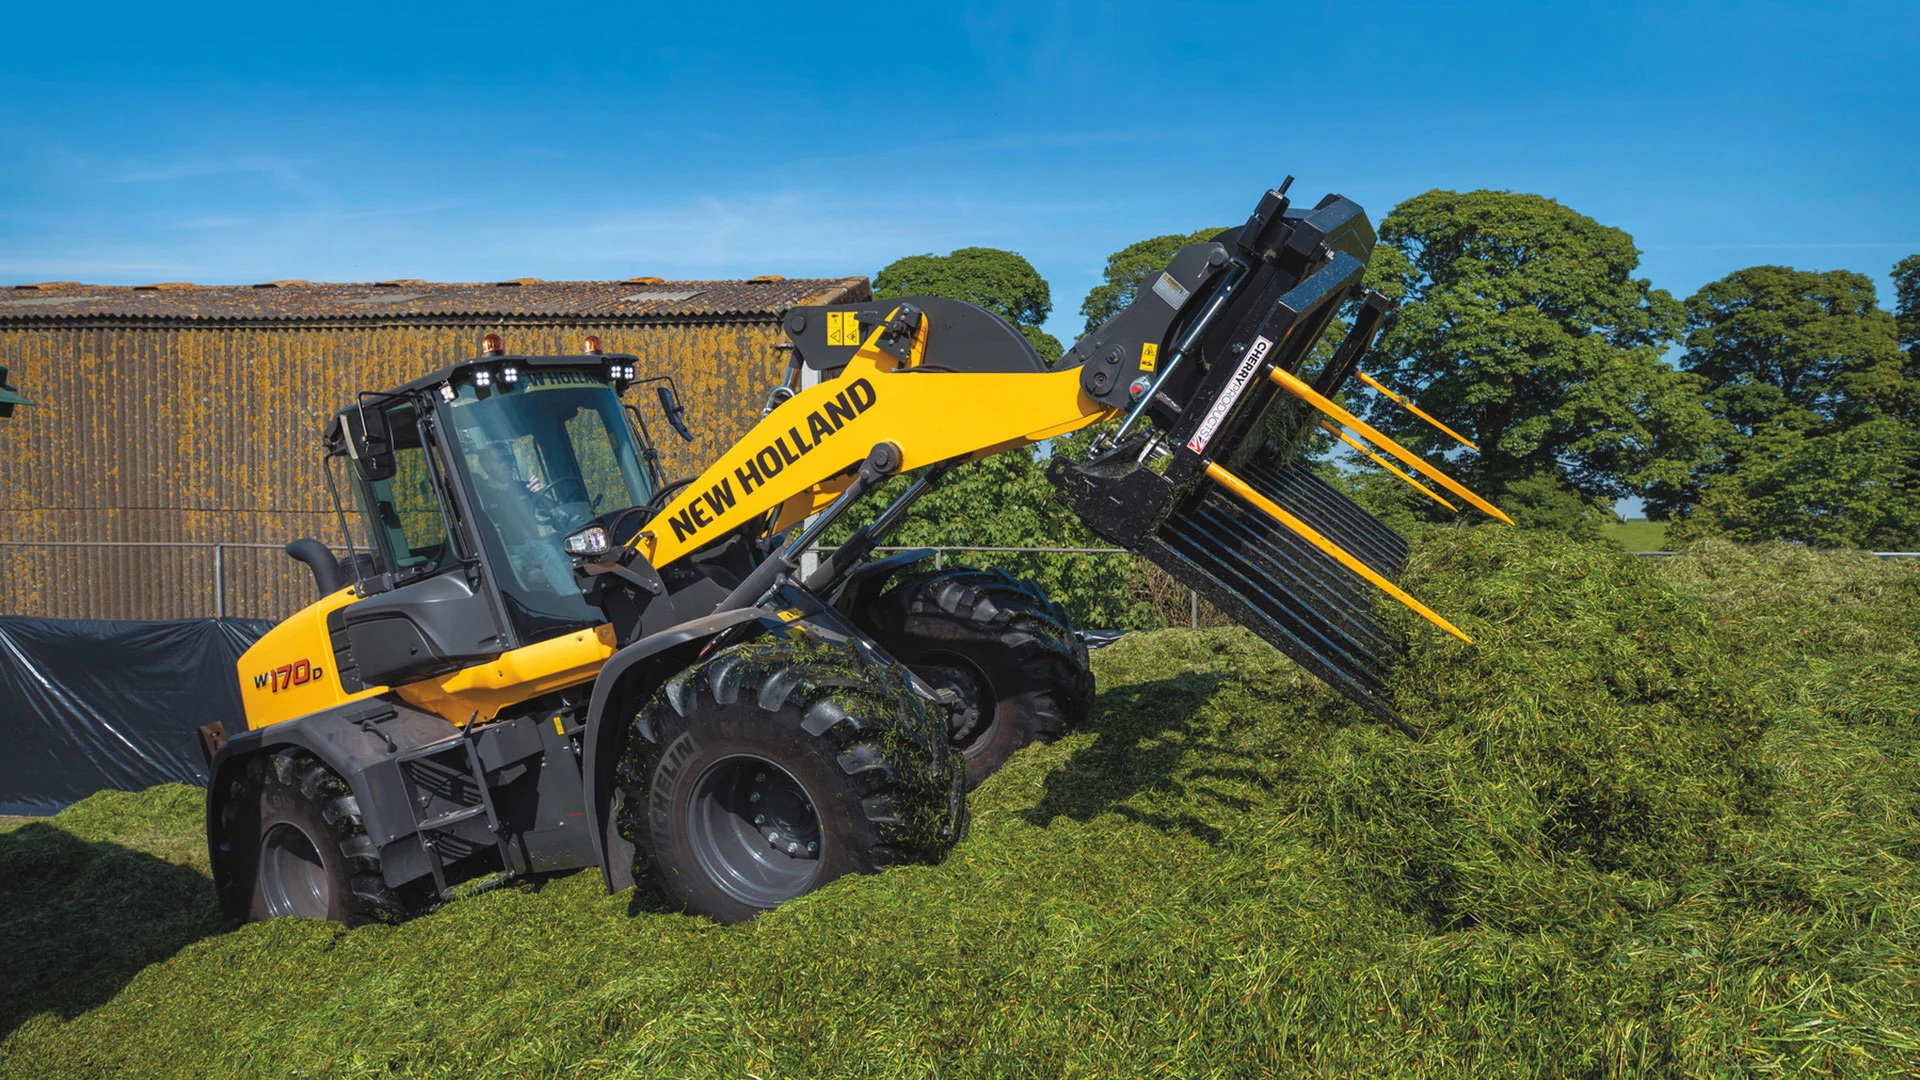 New Holland W170D wheel loader in action, lifting fresh green silage against a clear blue sky, showcasing advanced farming machinery and agricultural efficiency.